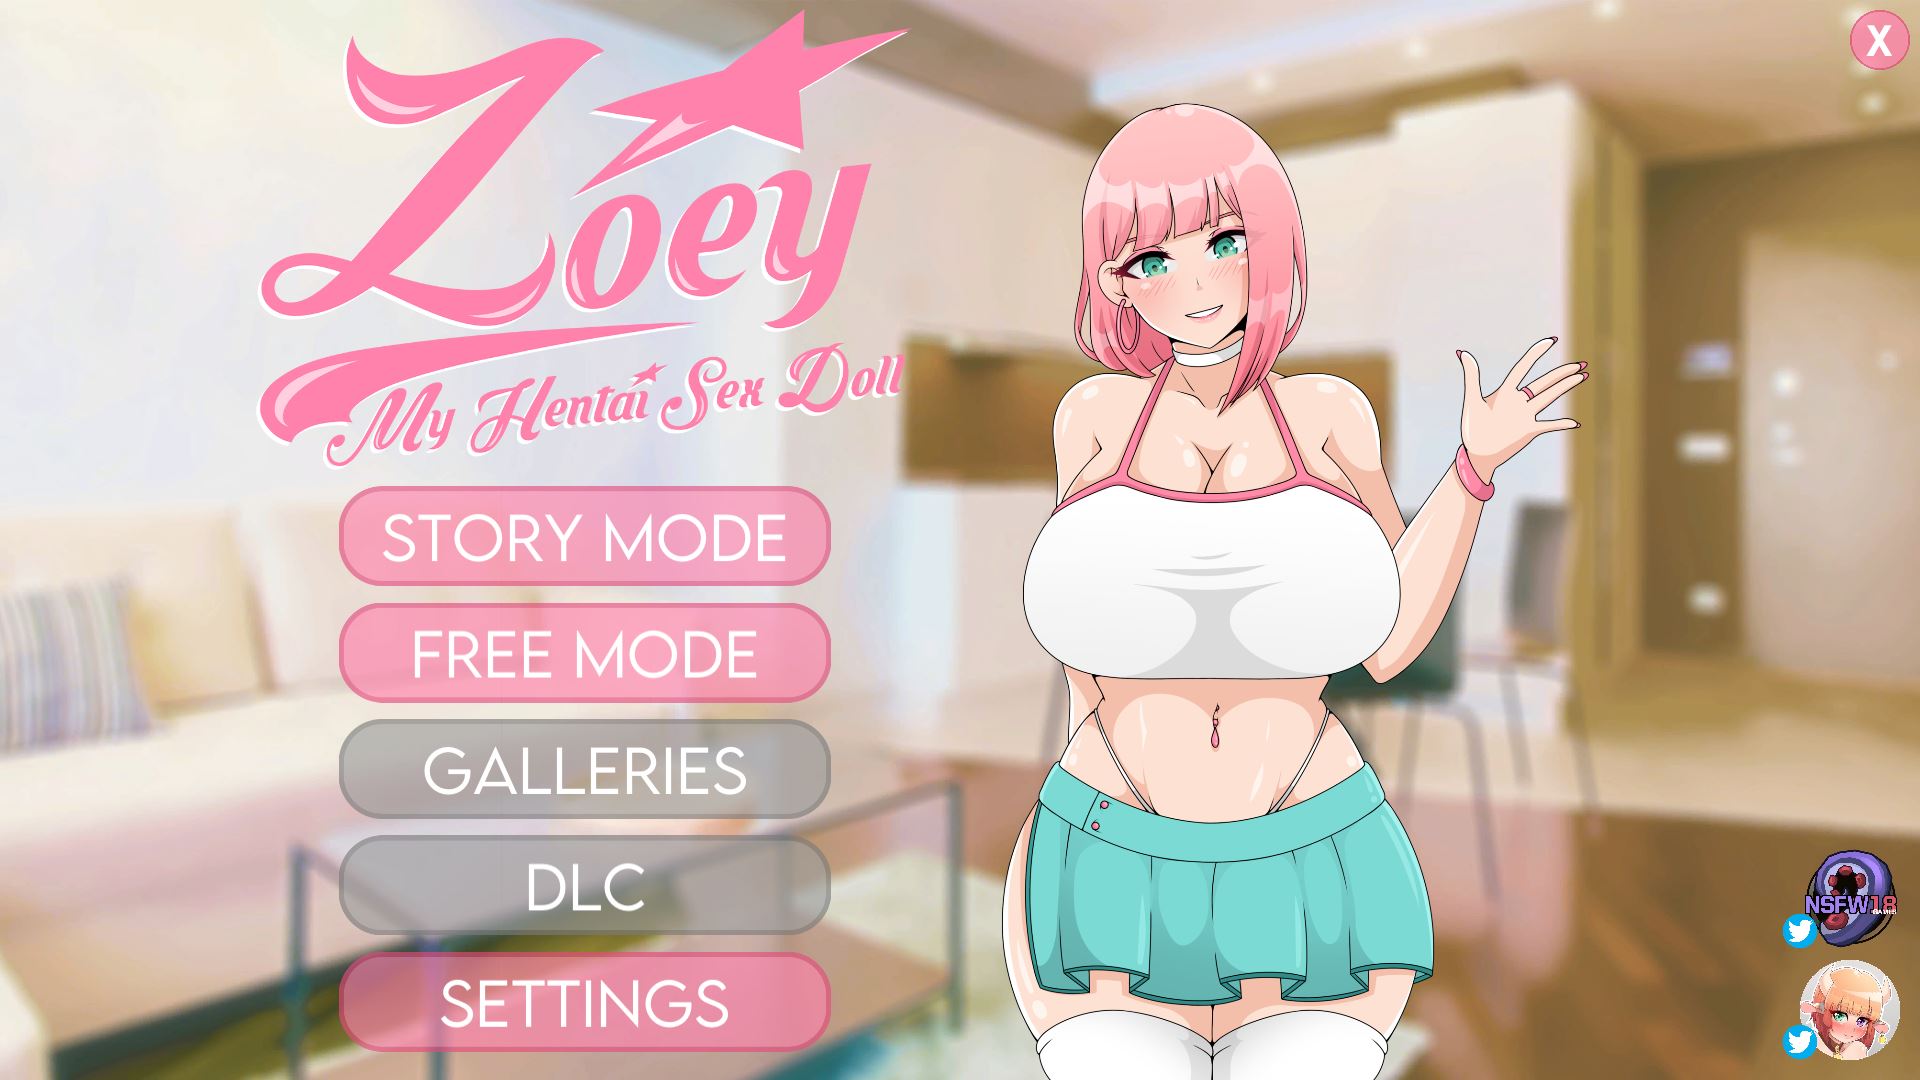 Hentai game dl